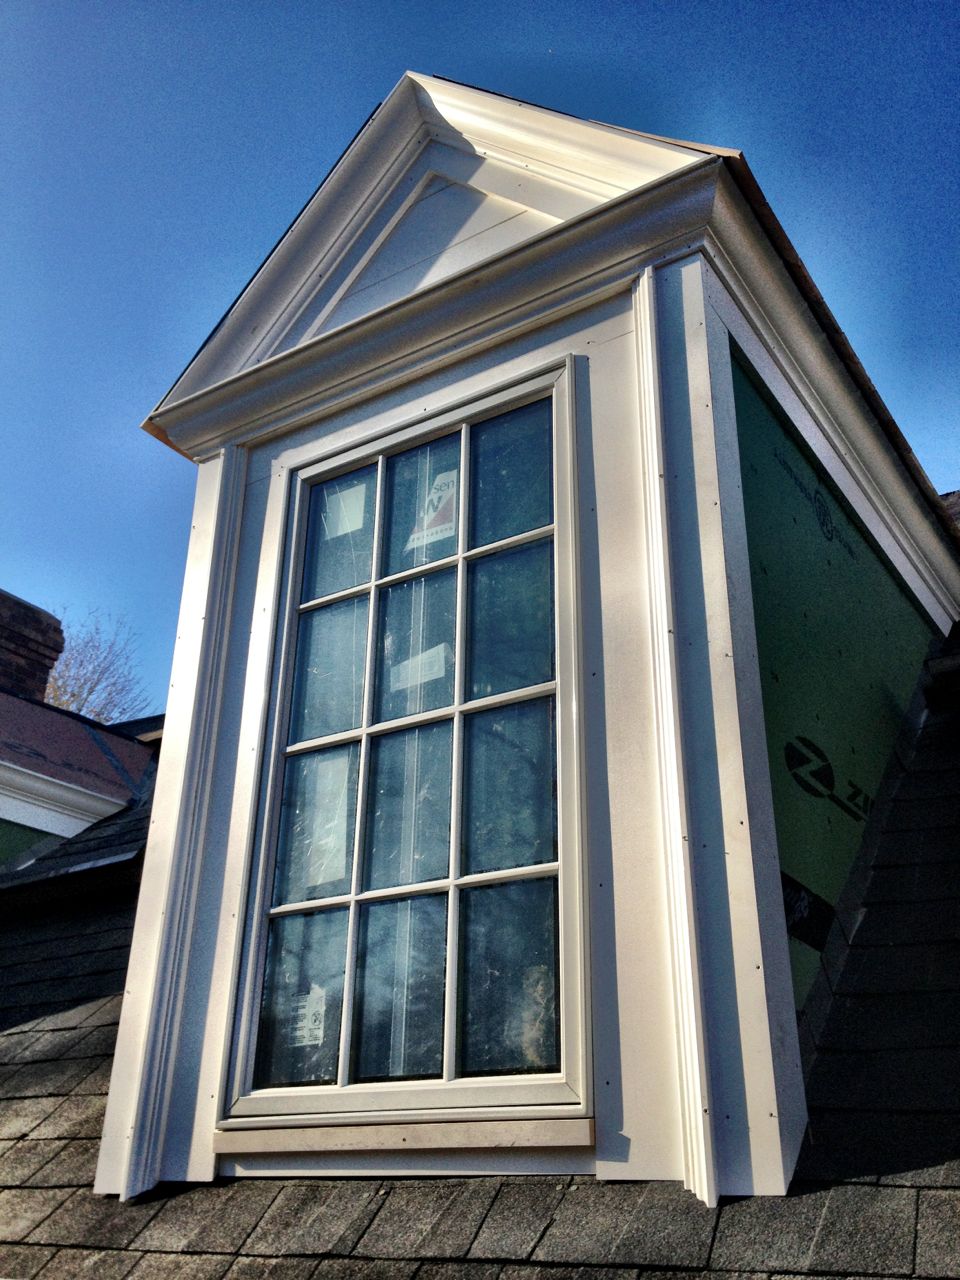 Achieving the Historic Dormer